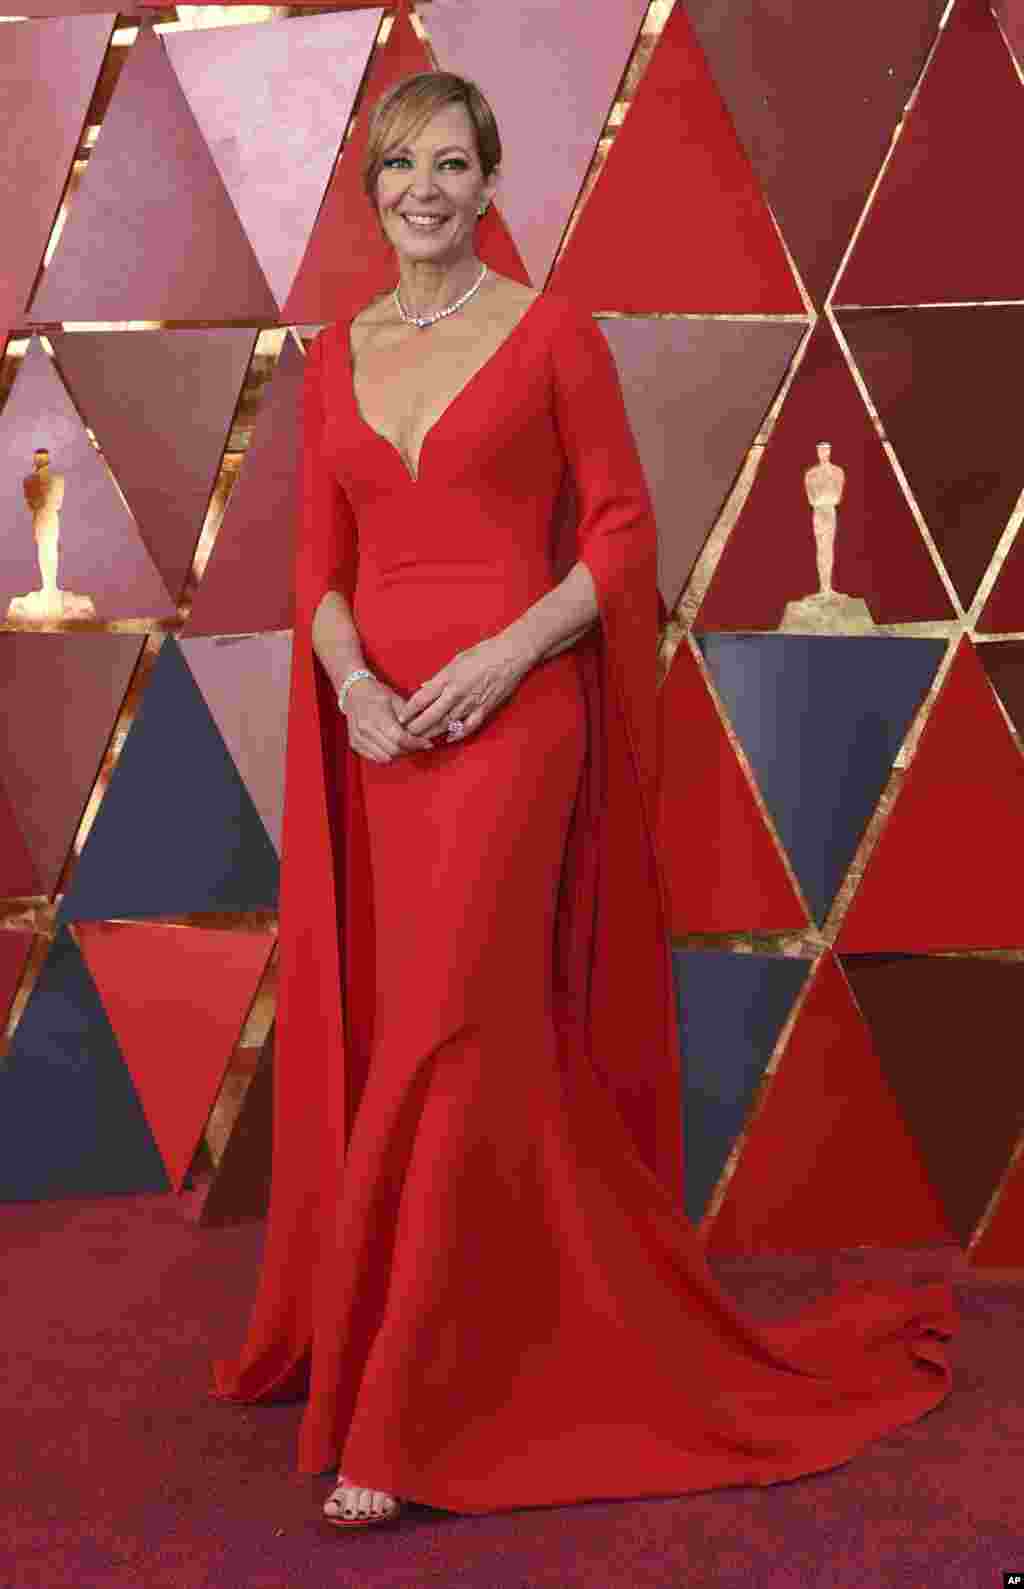 Allison Janney arrives at the Oscars on March 4, 2018, at the Dolby Theatre in Los Angeles.